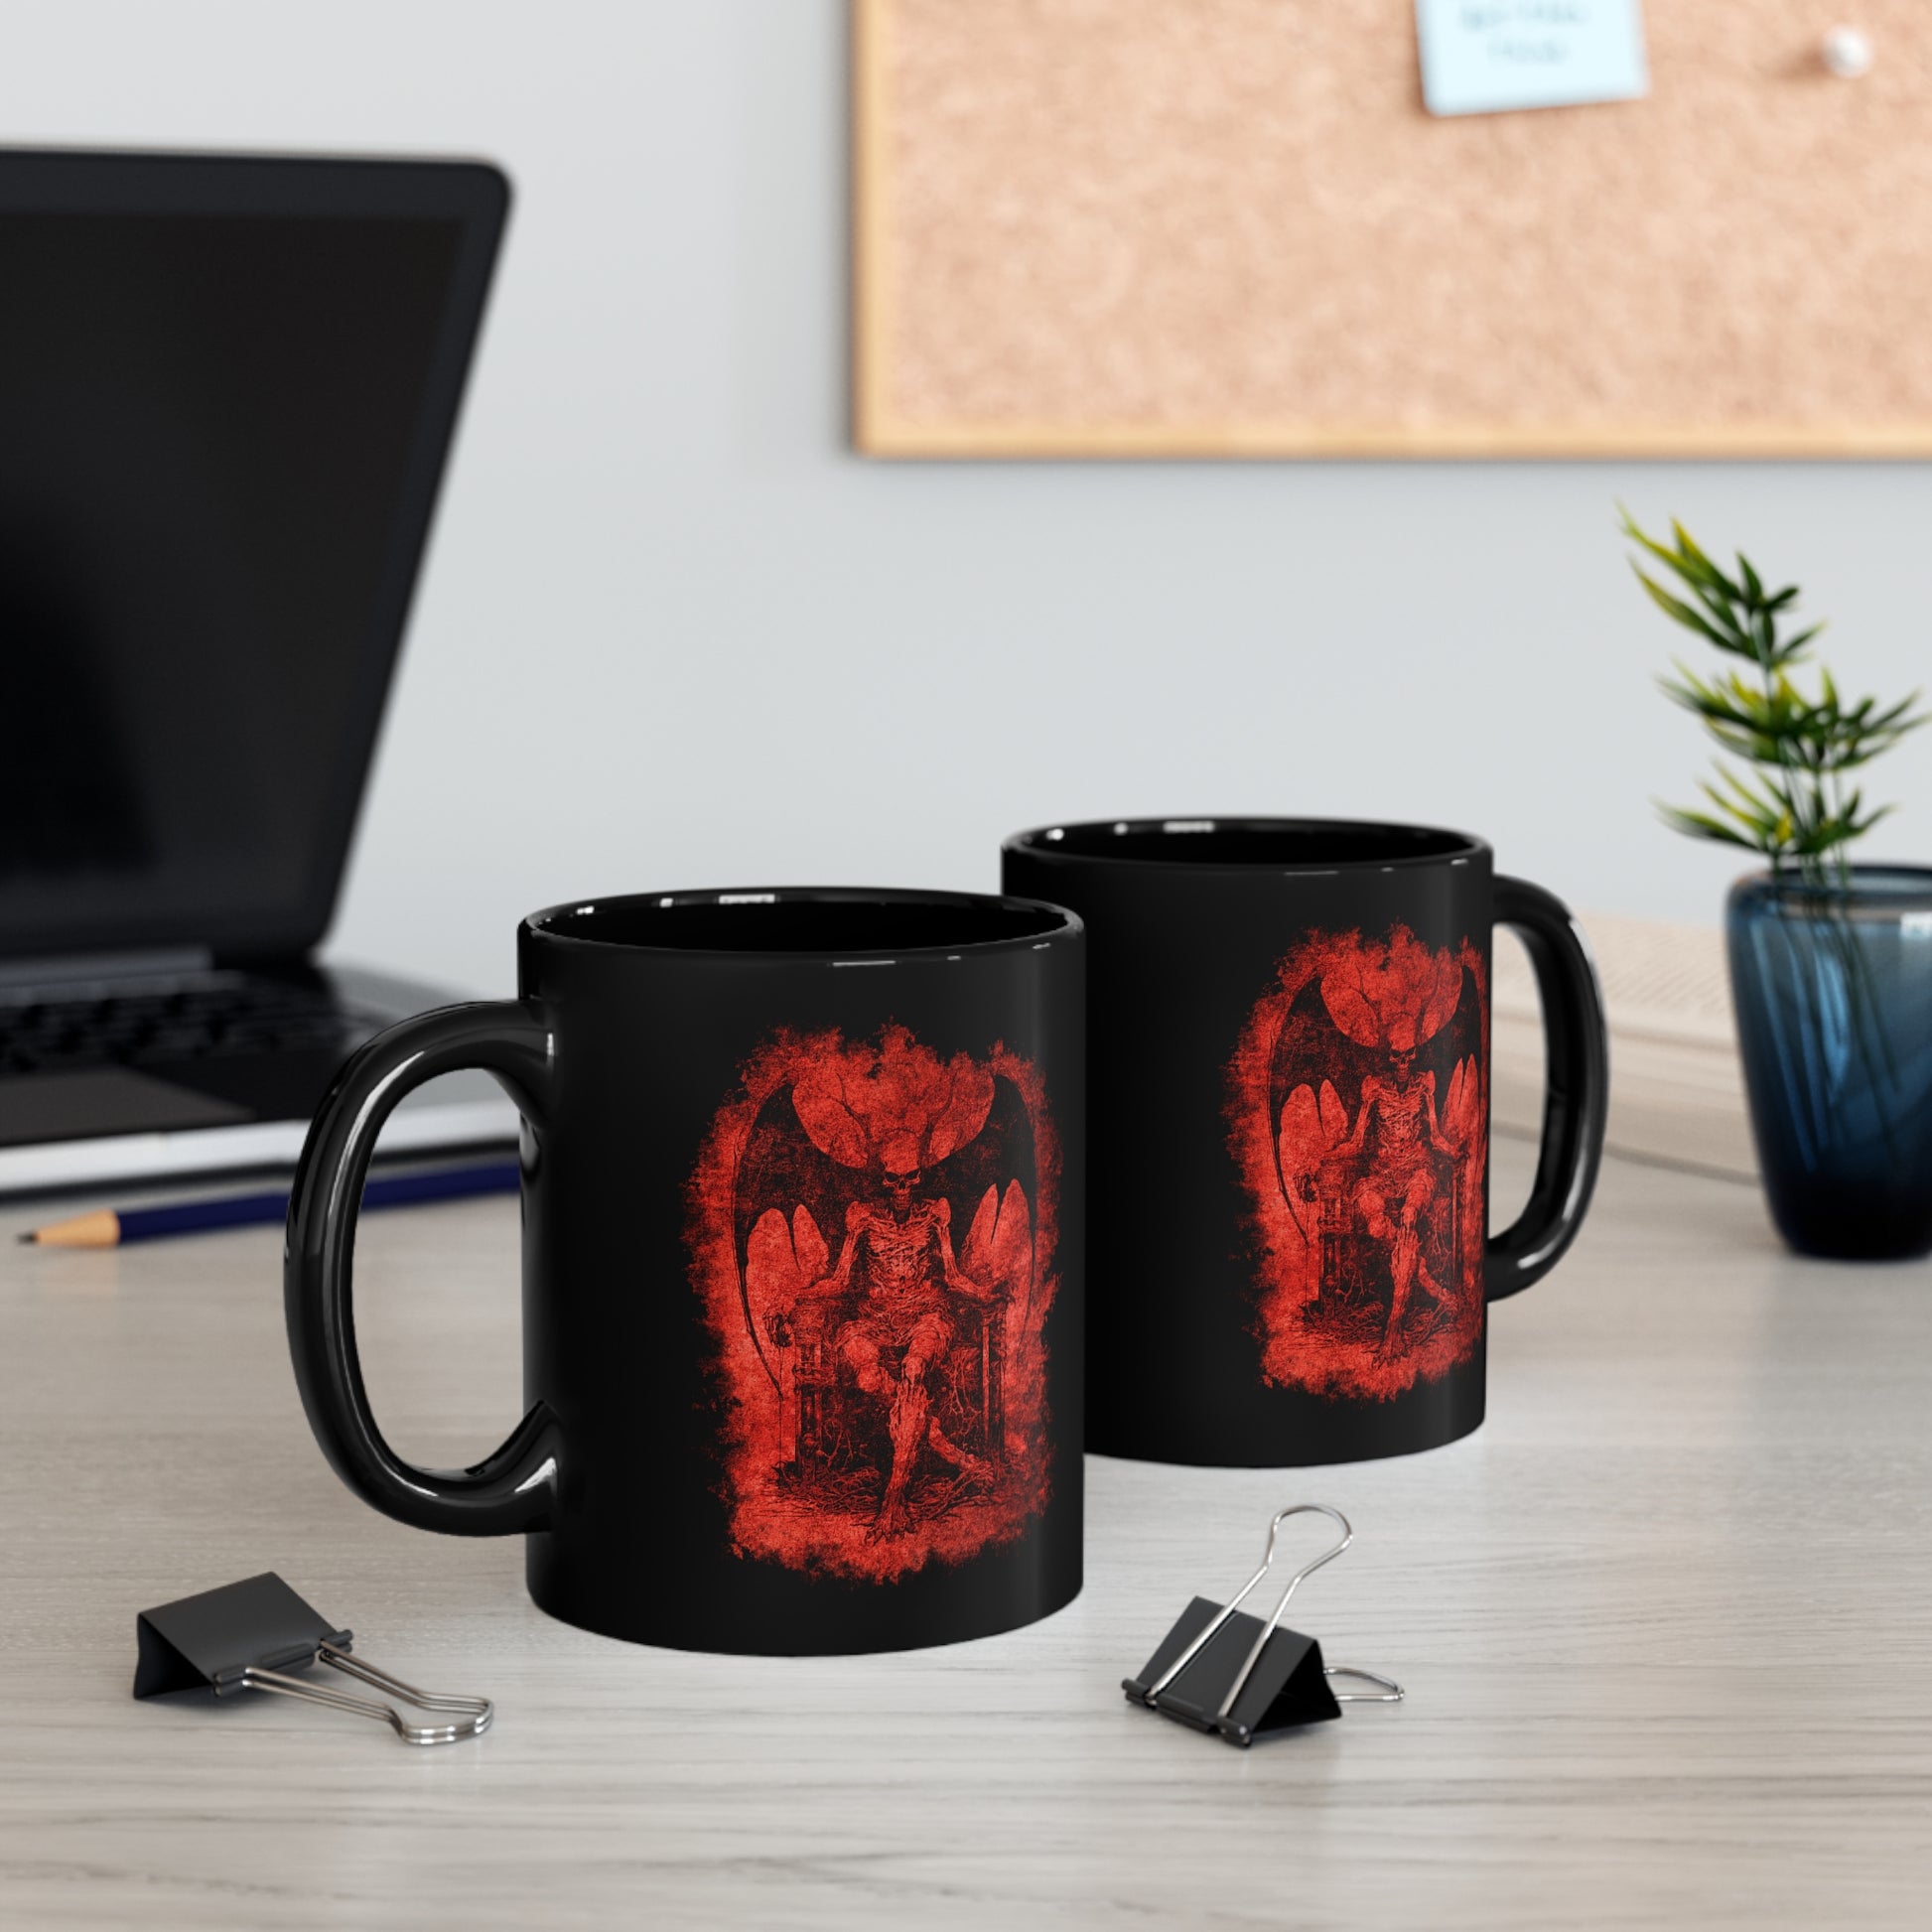 Mug Devil on his Throne in Hell in Red - Frogos Design